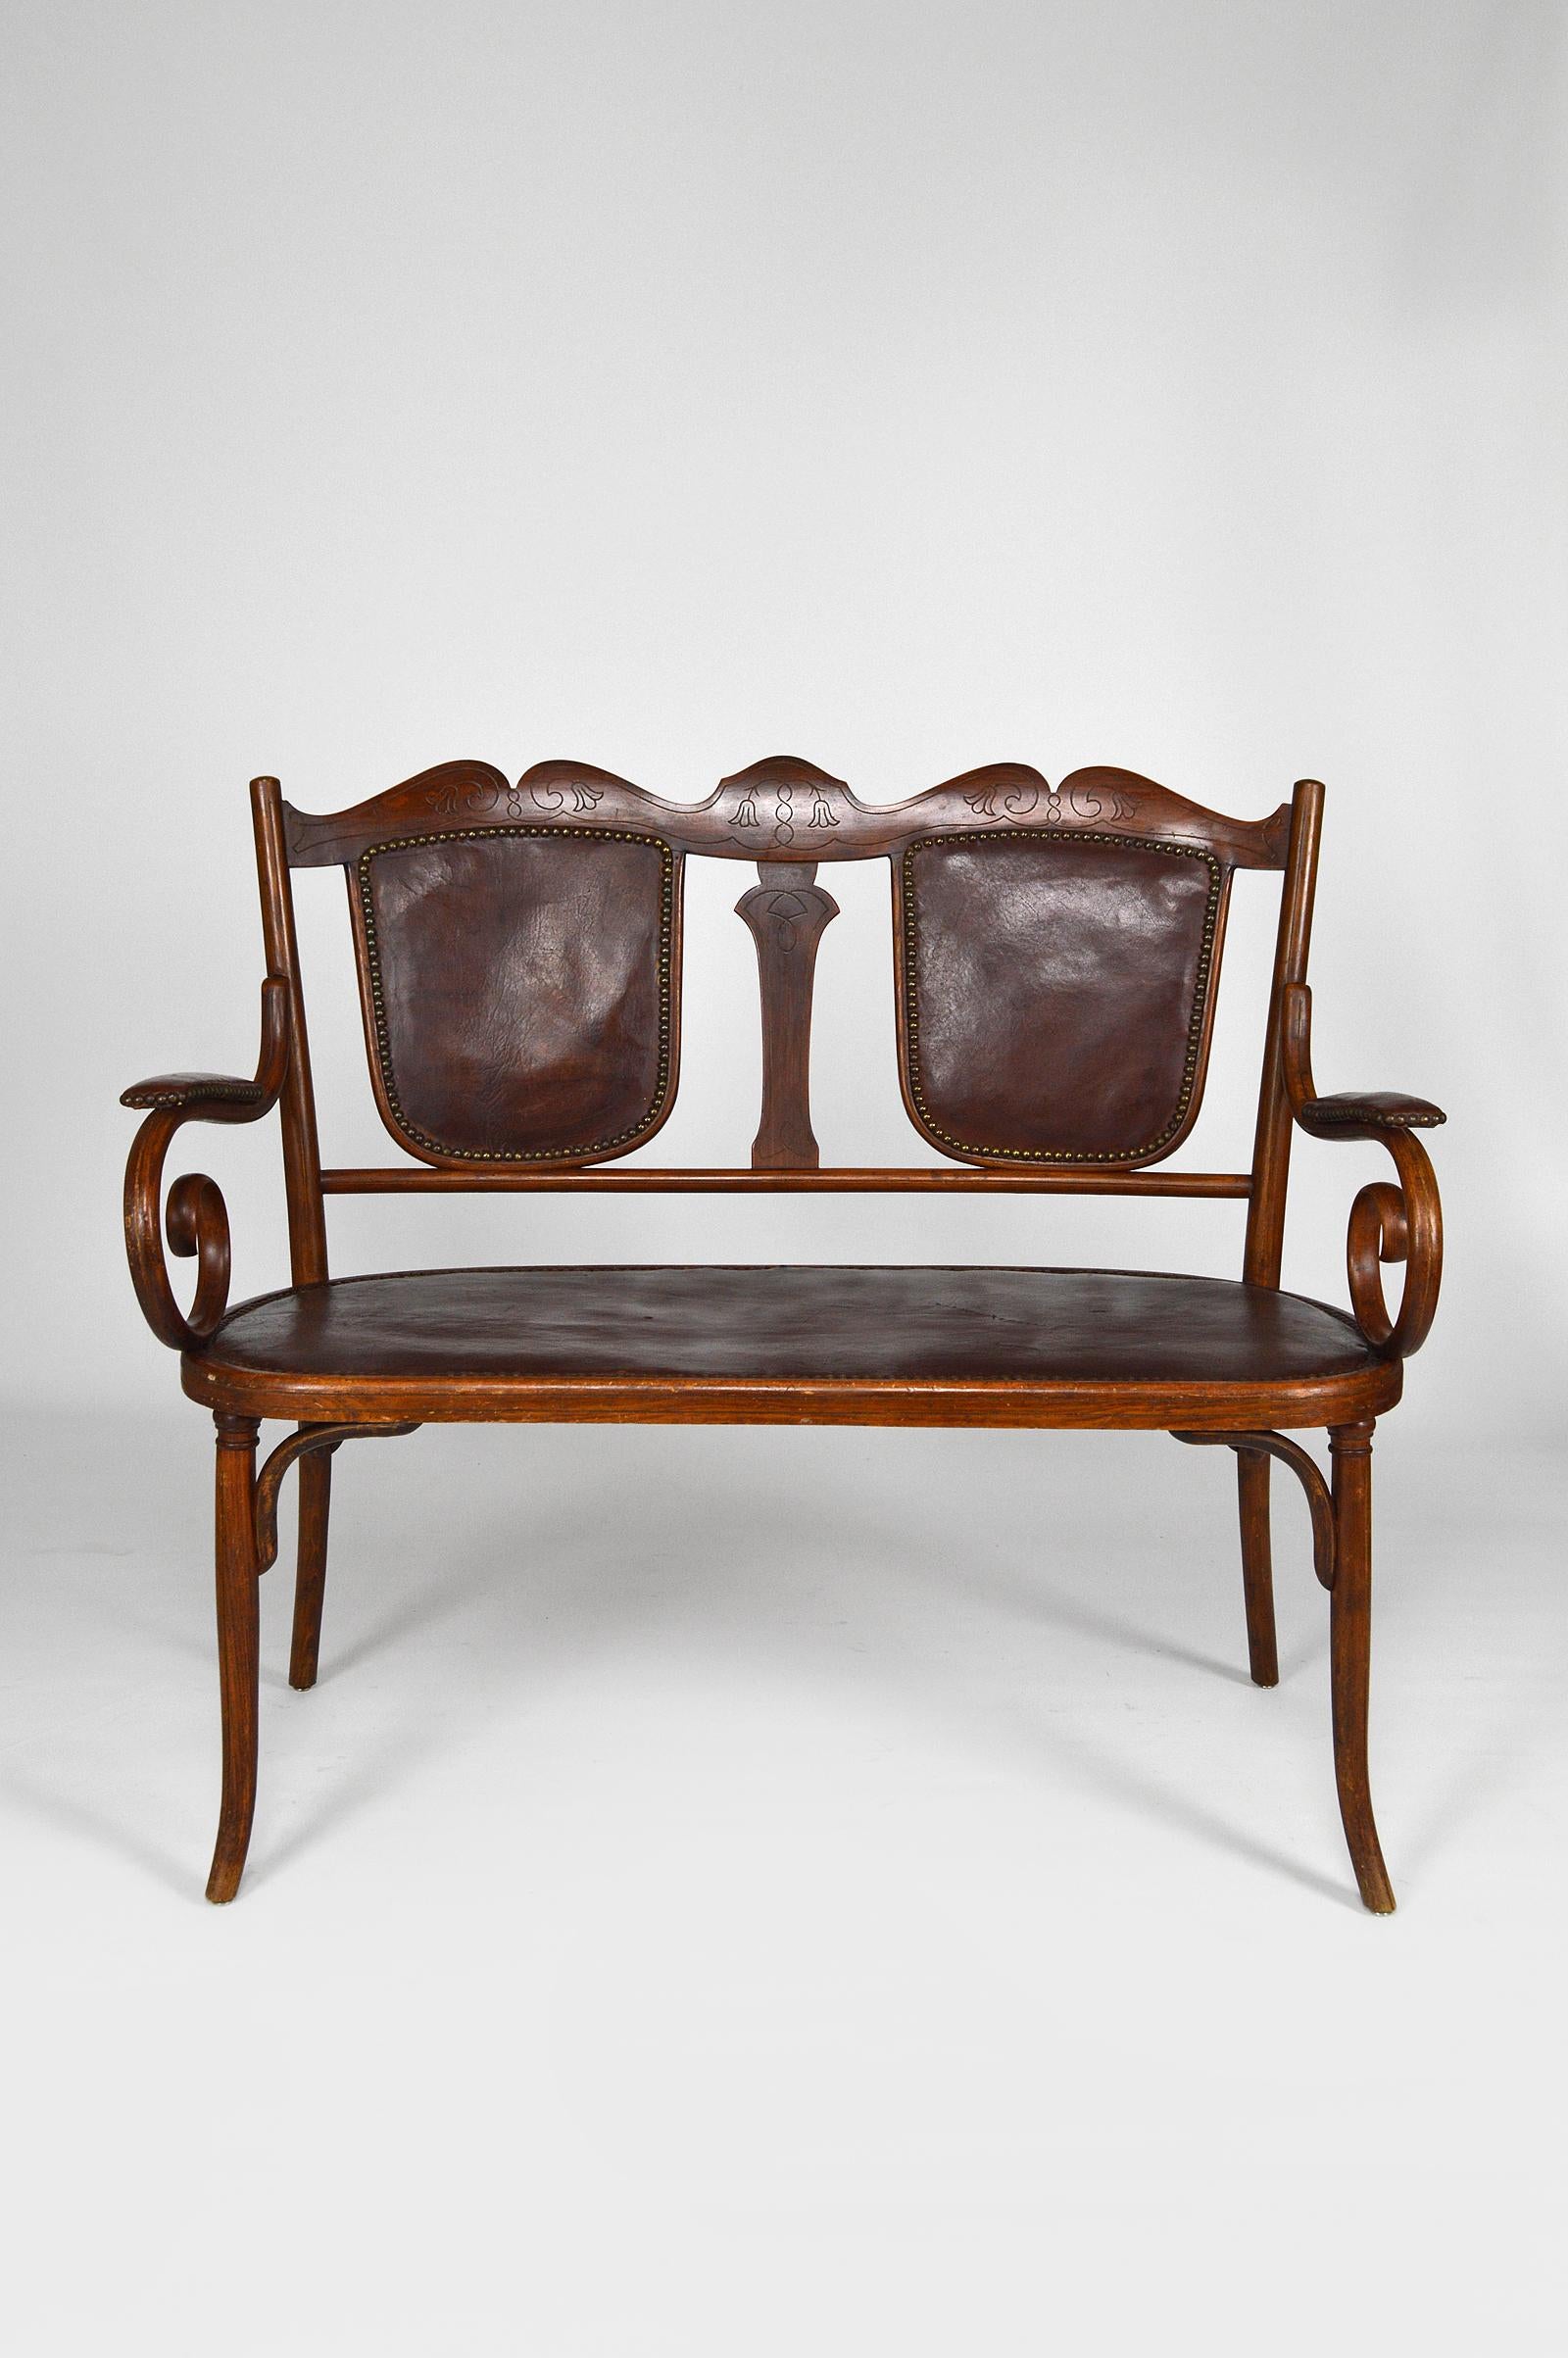 Czech Art Nouveau Living Room Set by Fischel in Bentwood and Leather, circa 1910